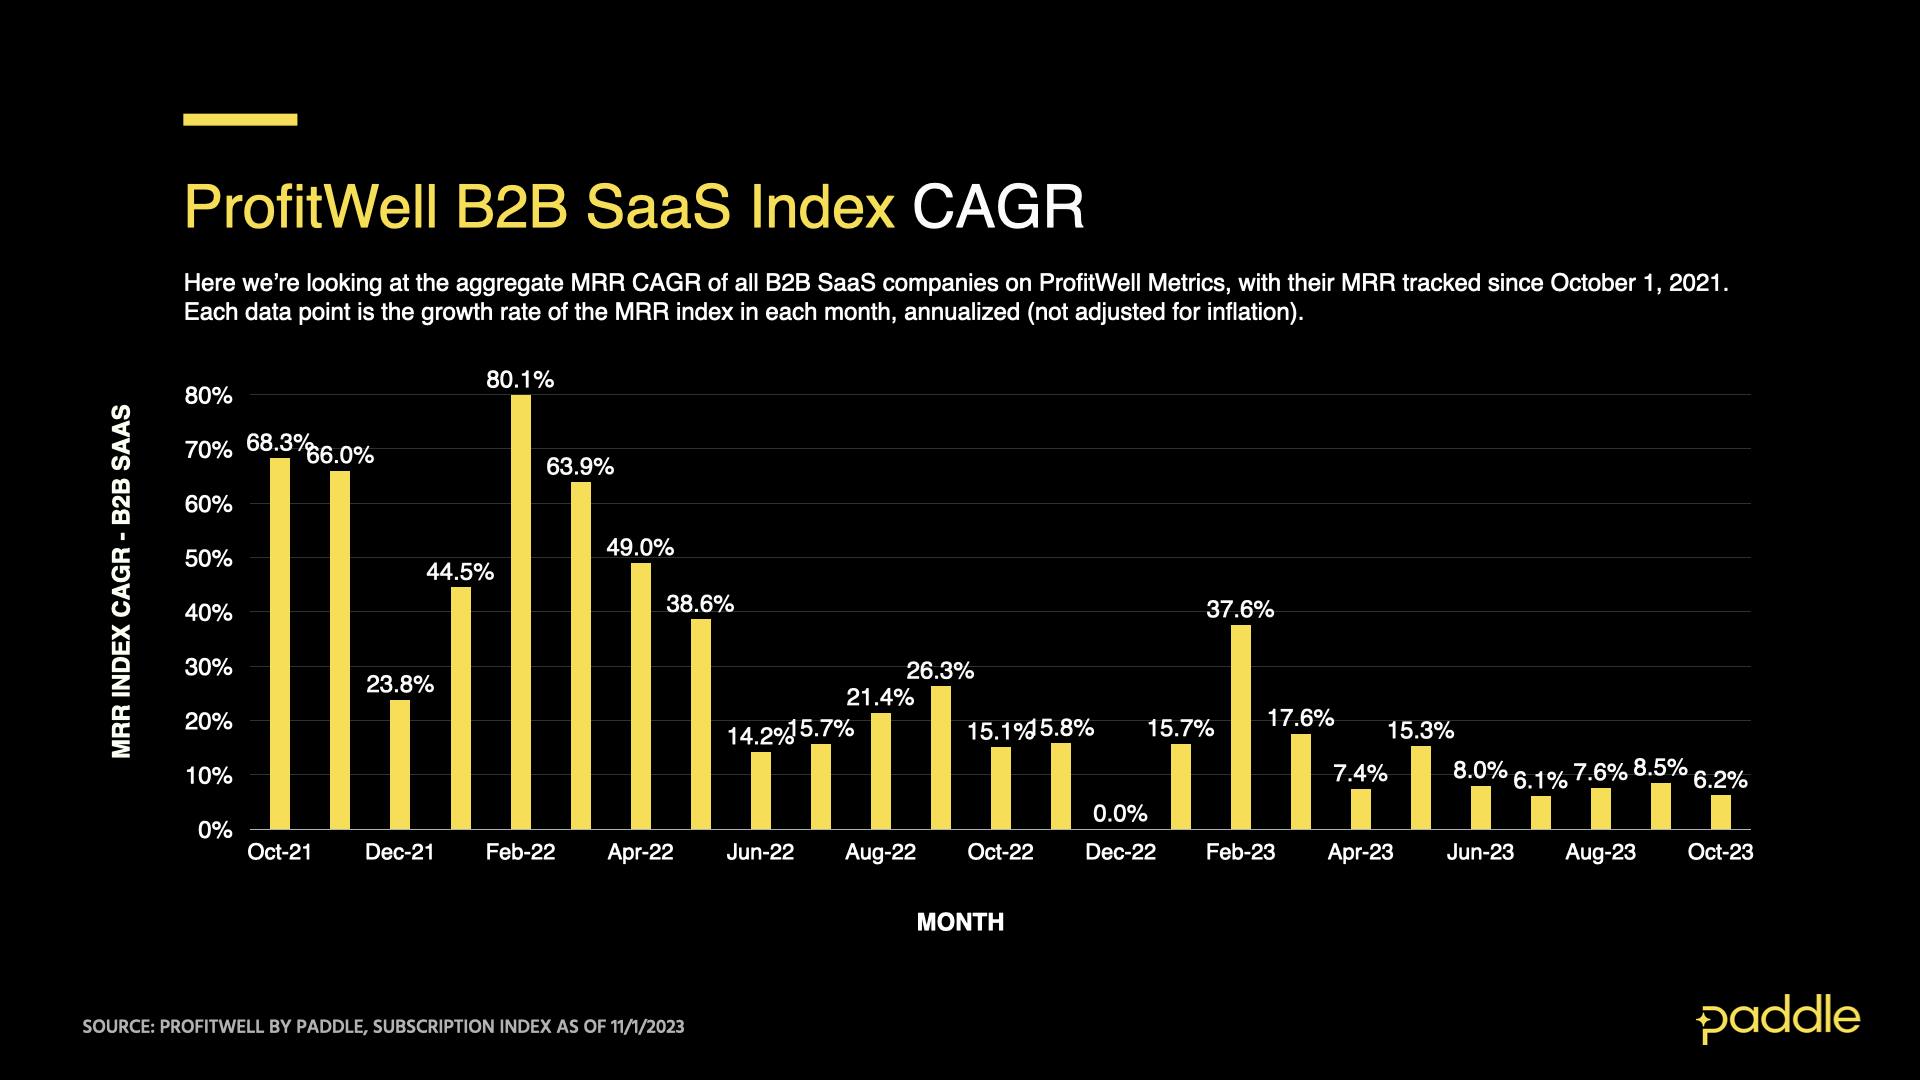 ProfitWell B2B SaaS Index as of November 1, 2023 - Compound Annual Growth Rate in MRR, Monthly